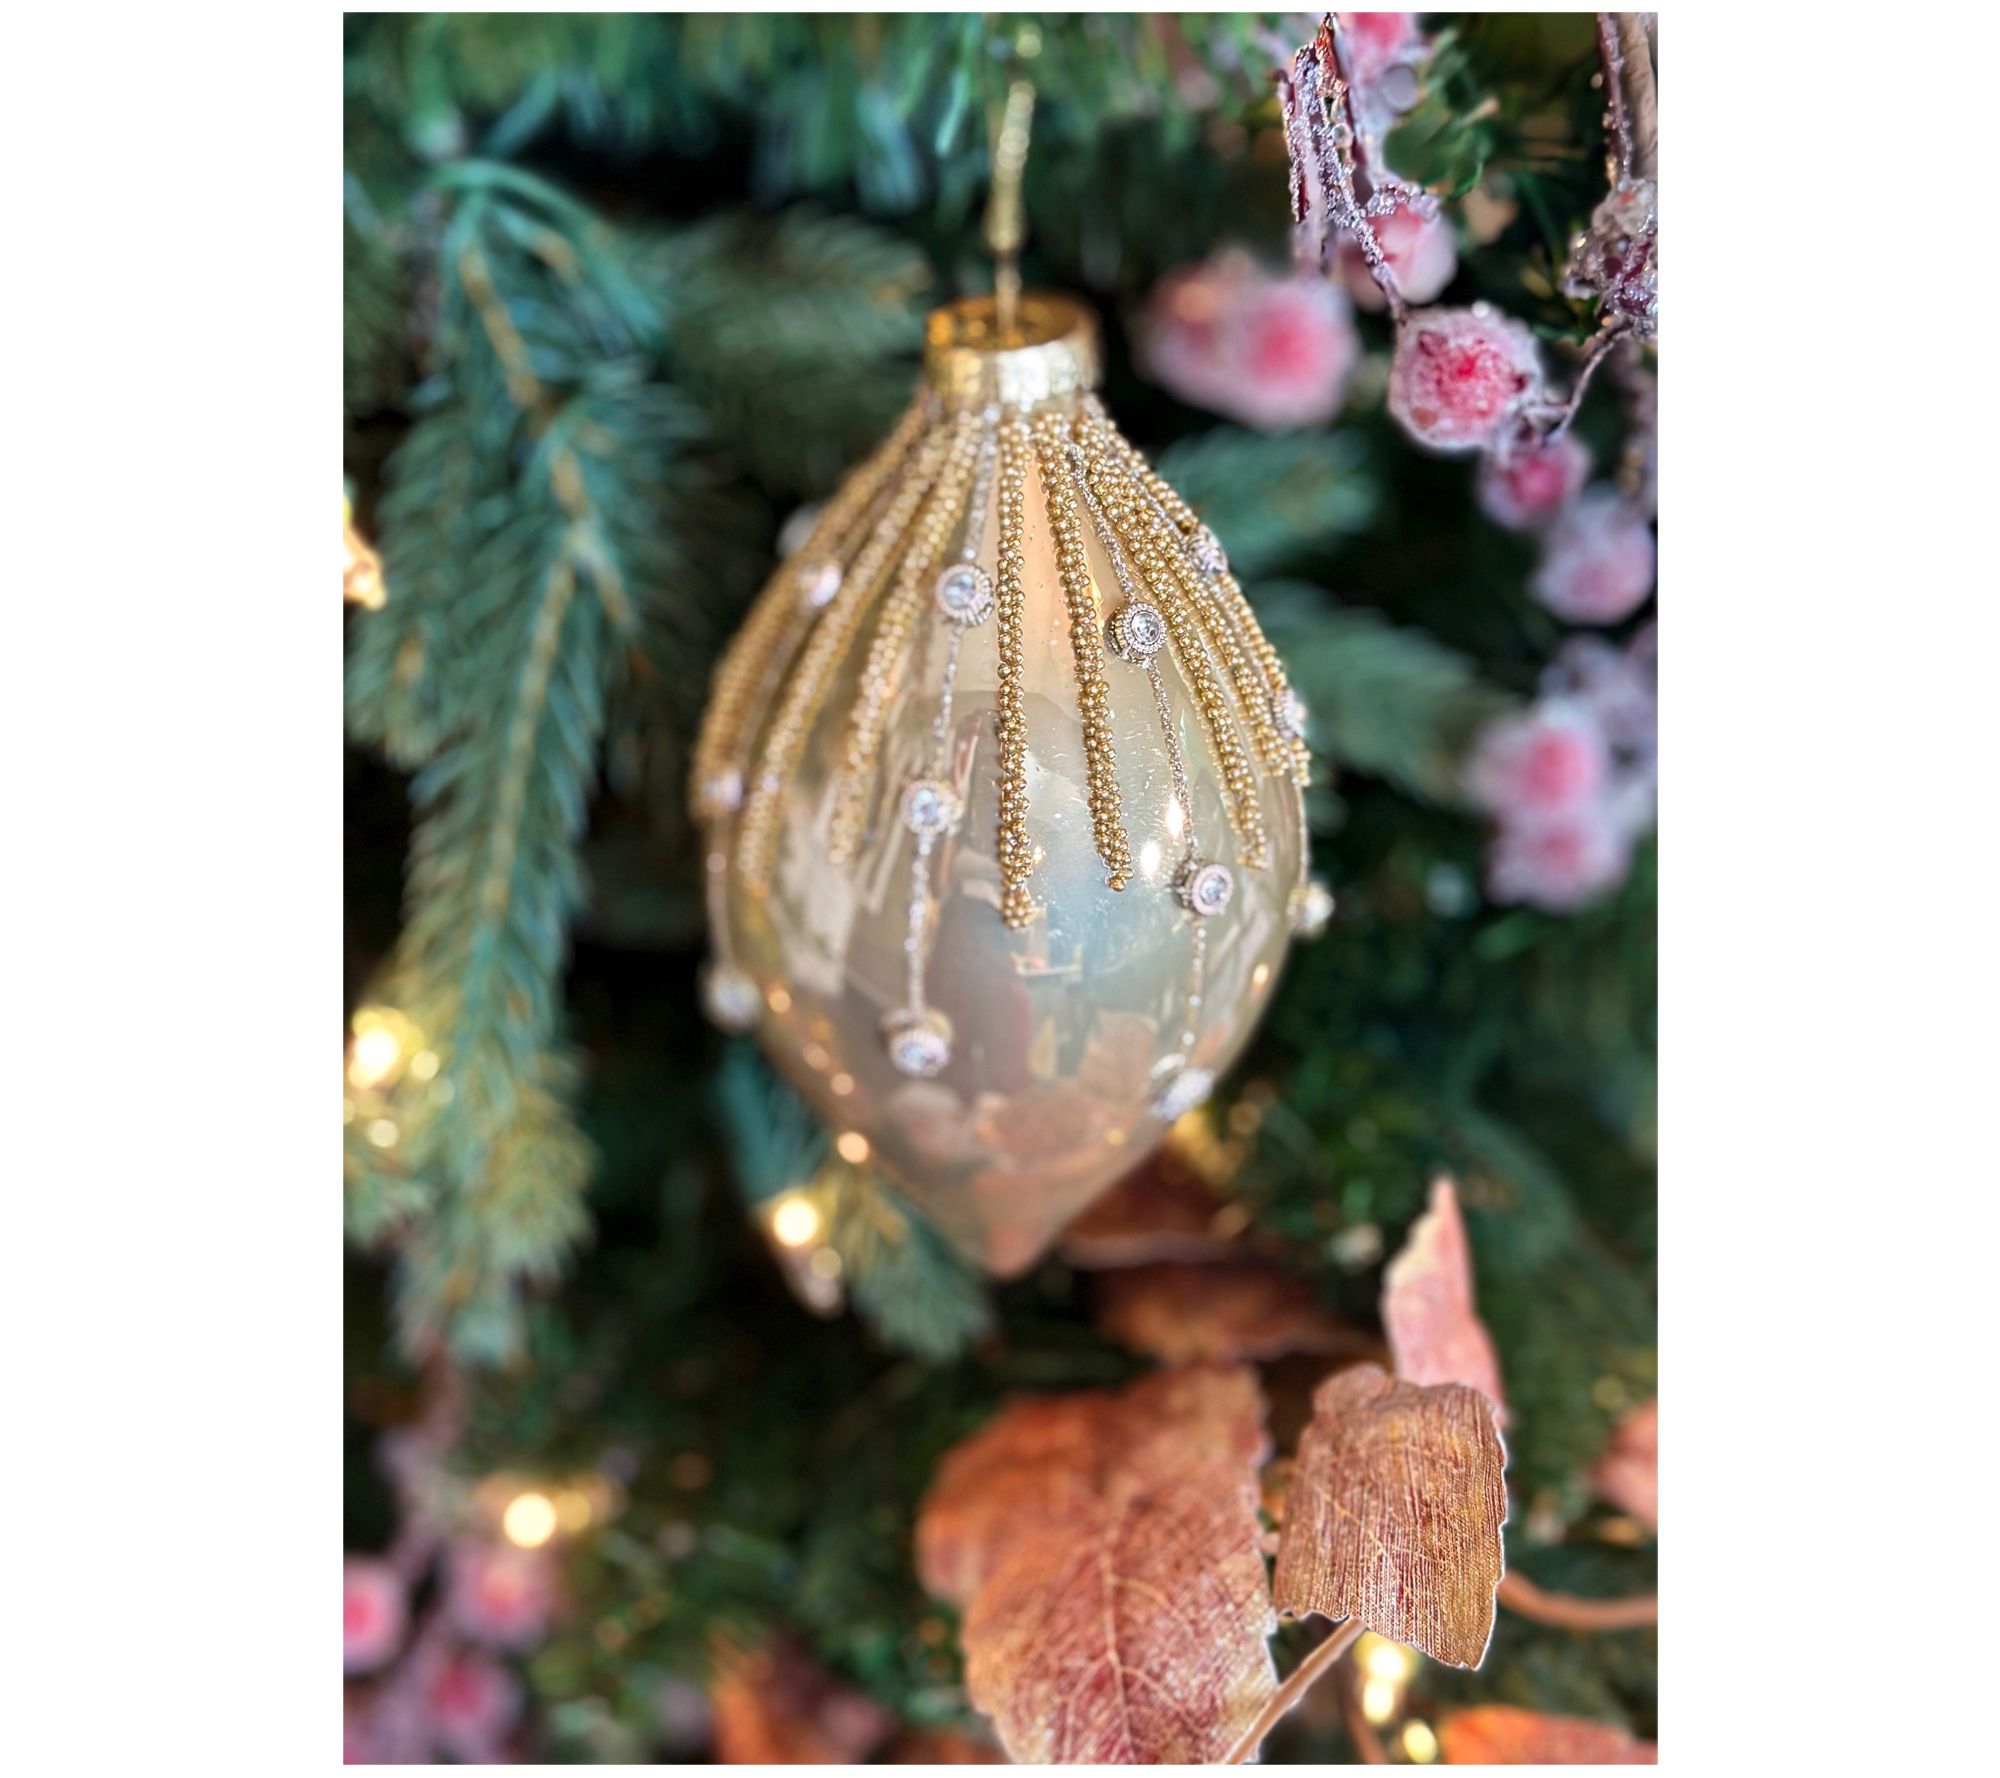 Simply Stunning Set of 6 Glass Ornaments by Janine Graff - QVC.com